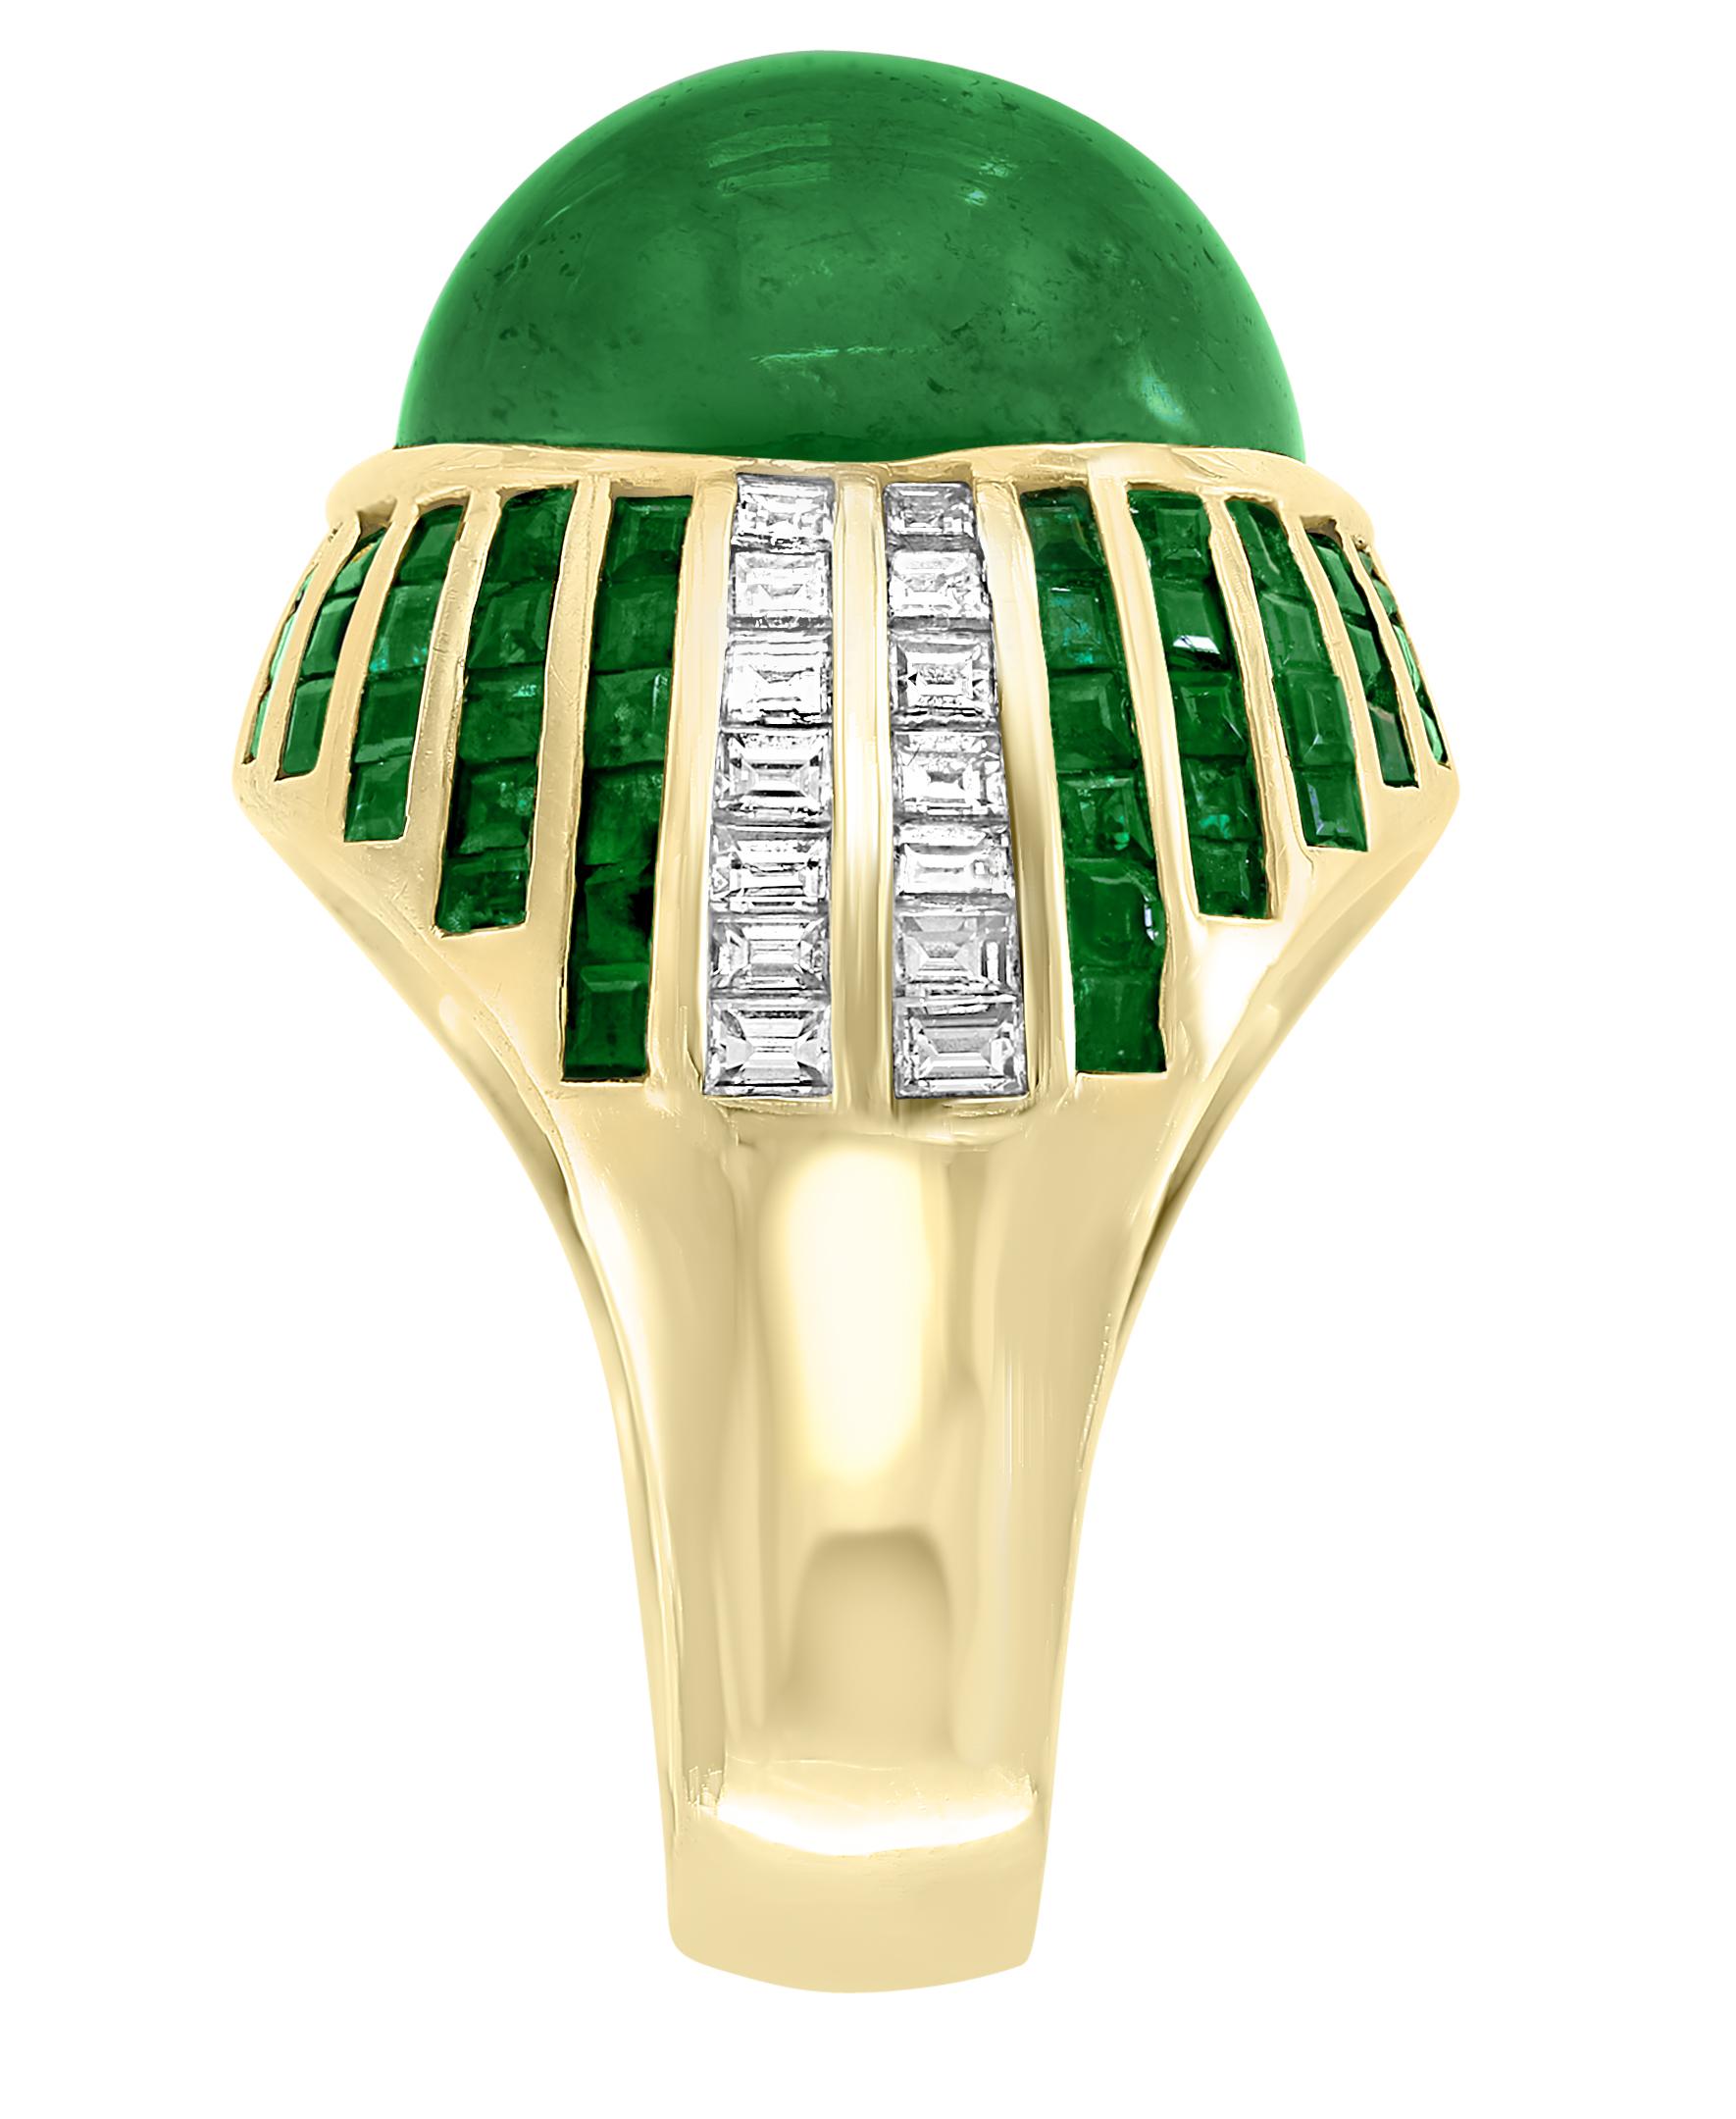 30 Carat Cabochon Colombian Emerald & Diamond 18 Karat Yellow Gold Cocktail Ring For Sale 3